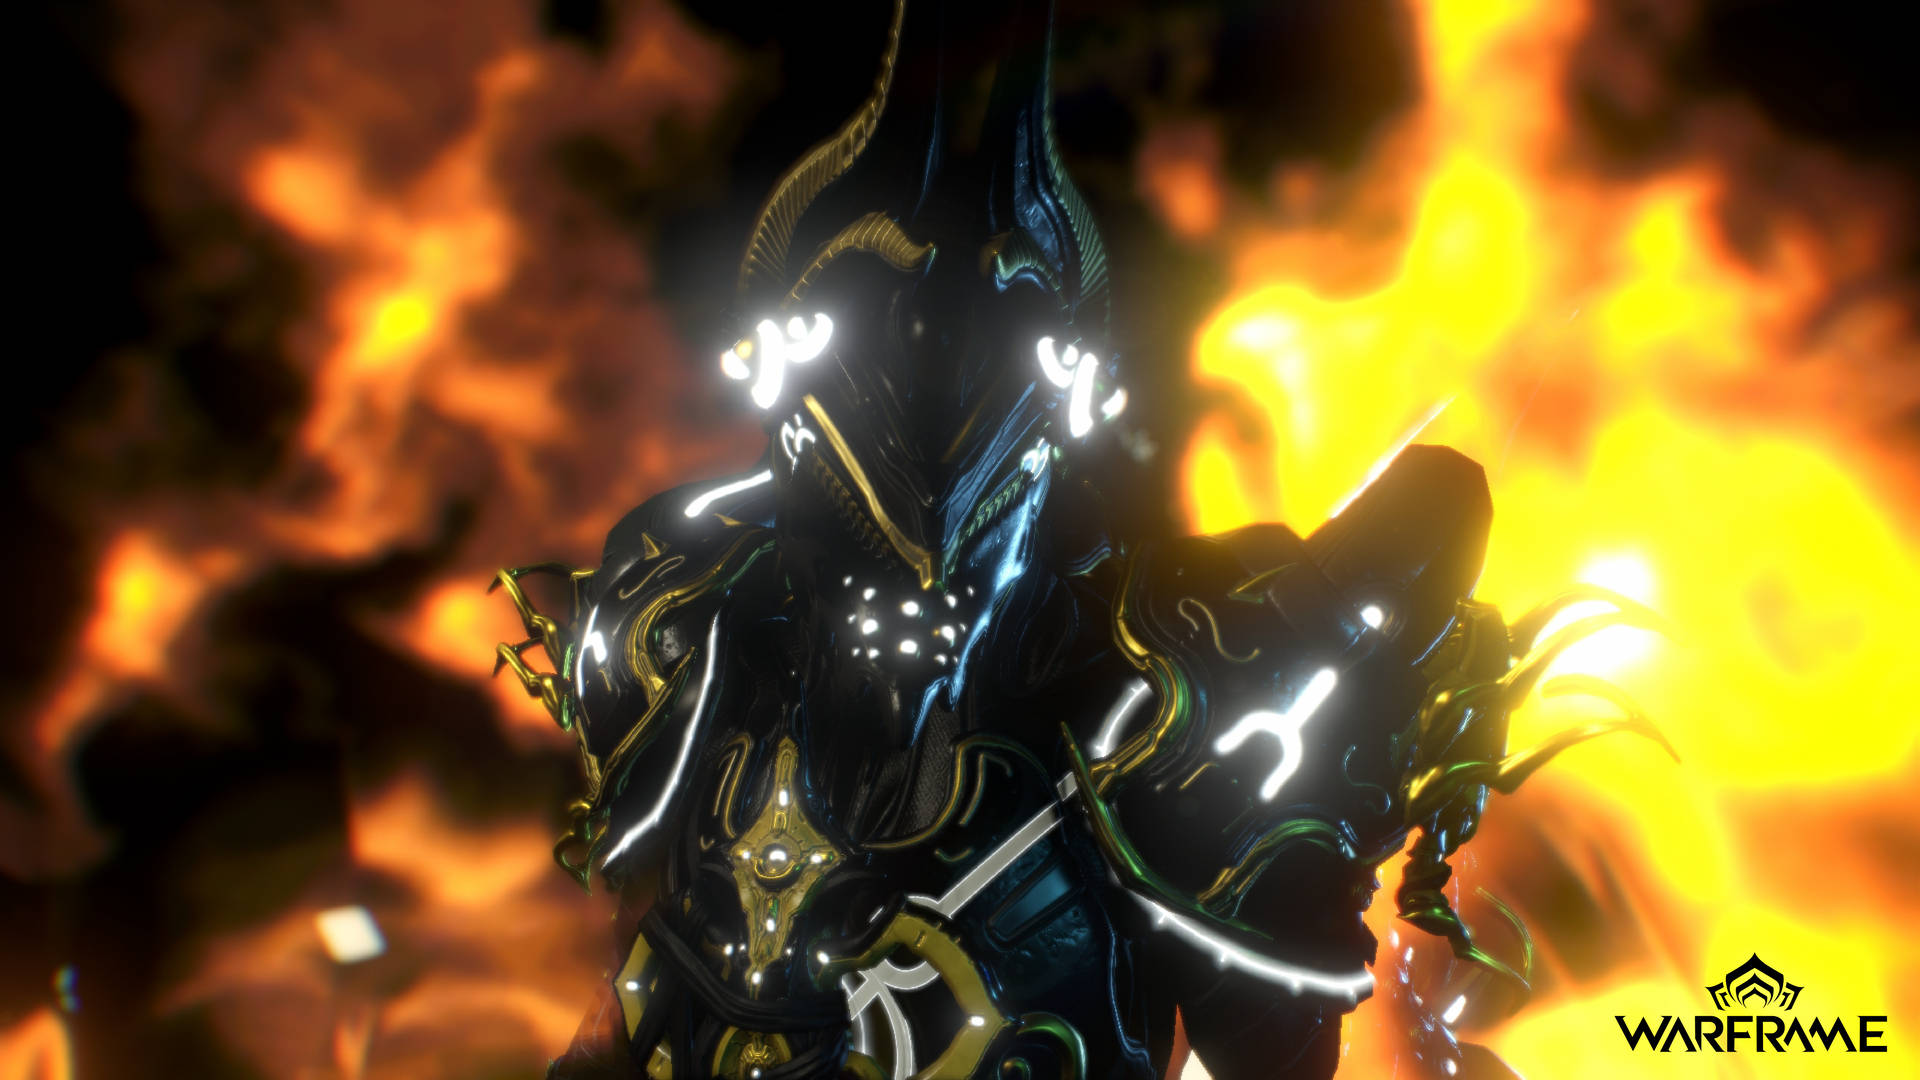 Tenno Ancient Soldier with metallic armor from Warframe wallpaper.